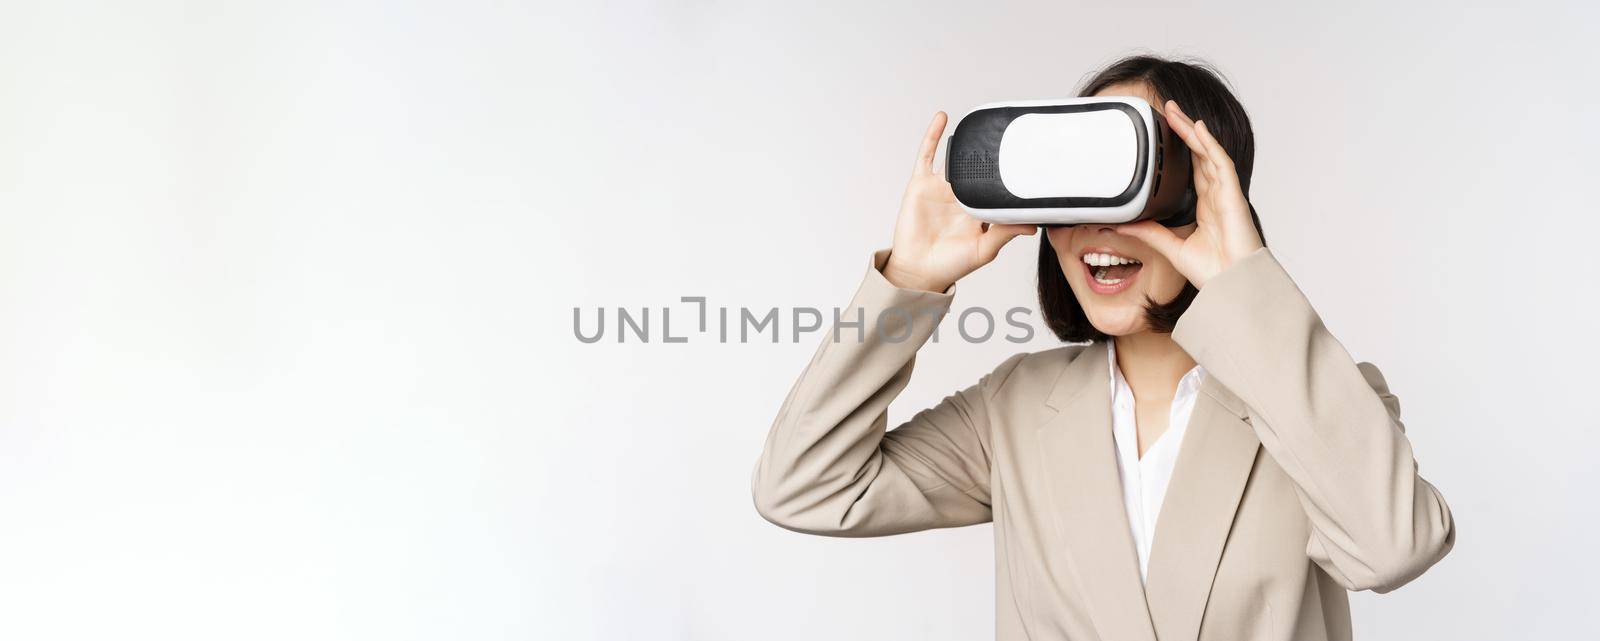 Amazed business woman in suit using virtual reality glasses, looking amazed in vr headset, standing over white background.